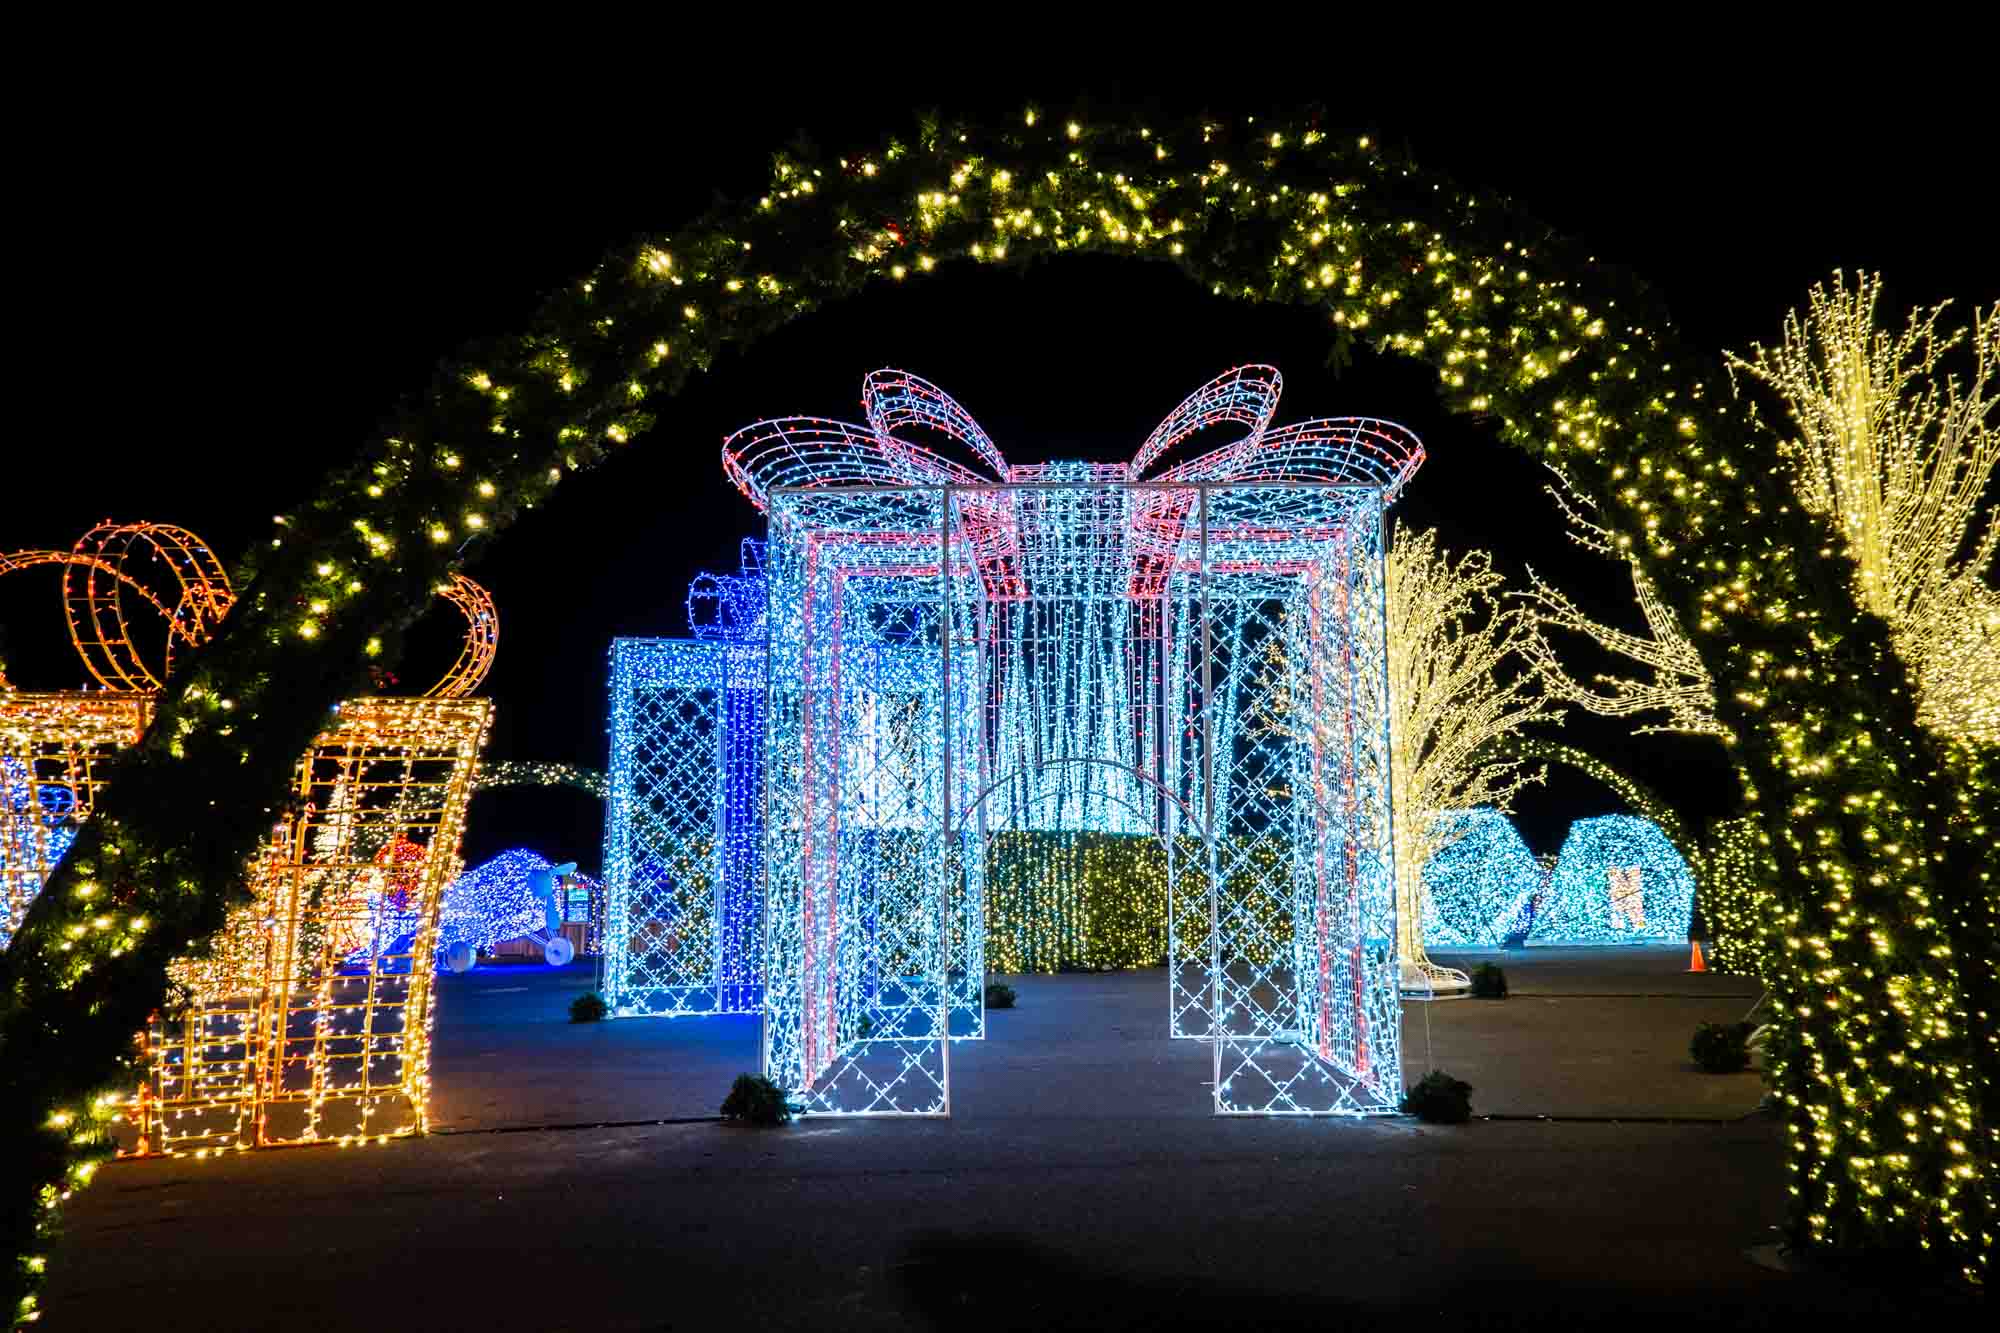 Giant, illuminated present packages at a light display